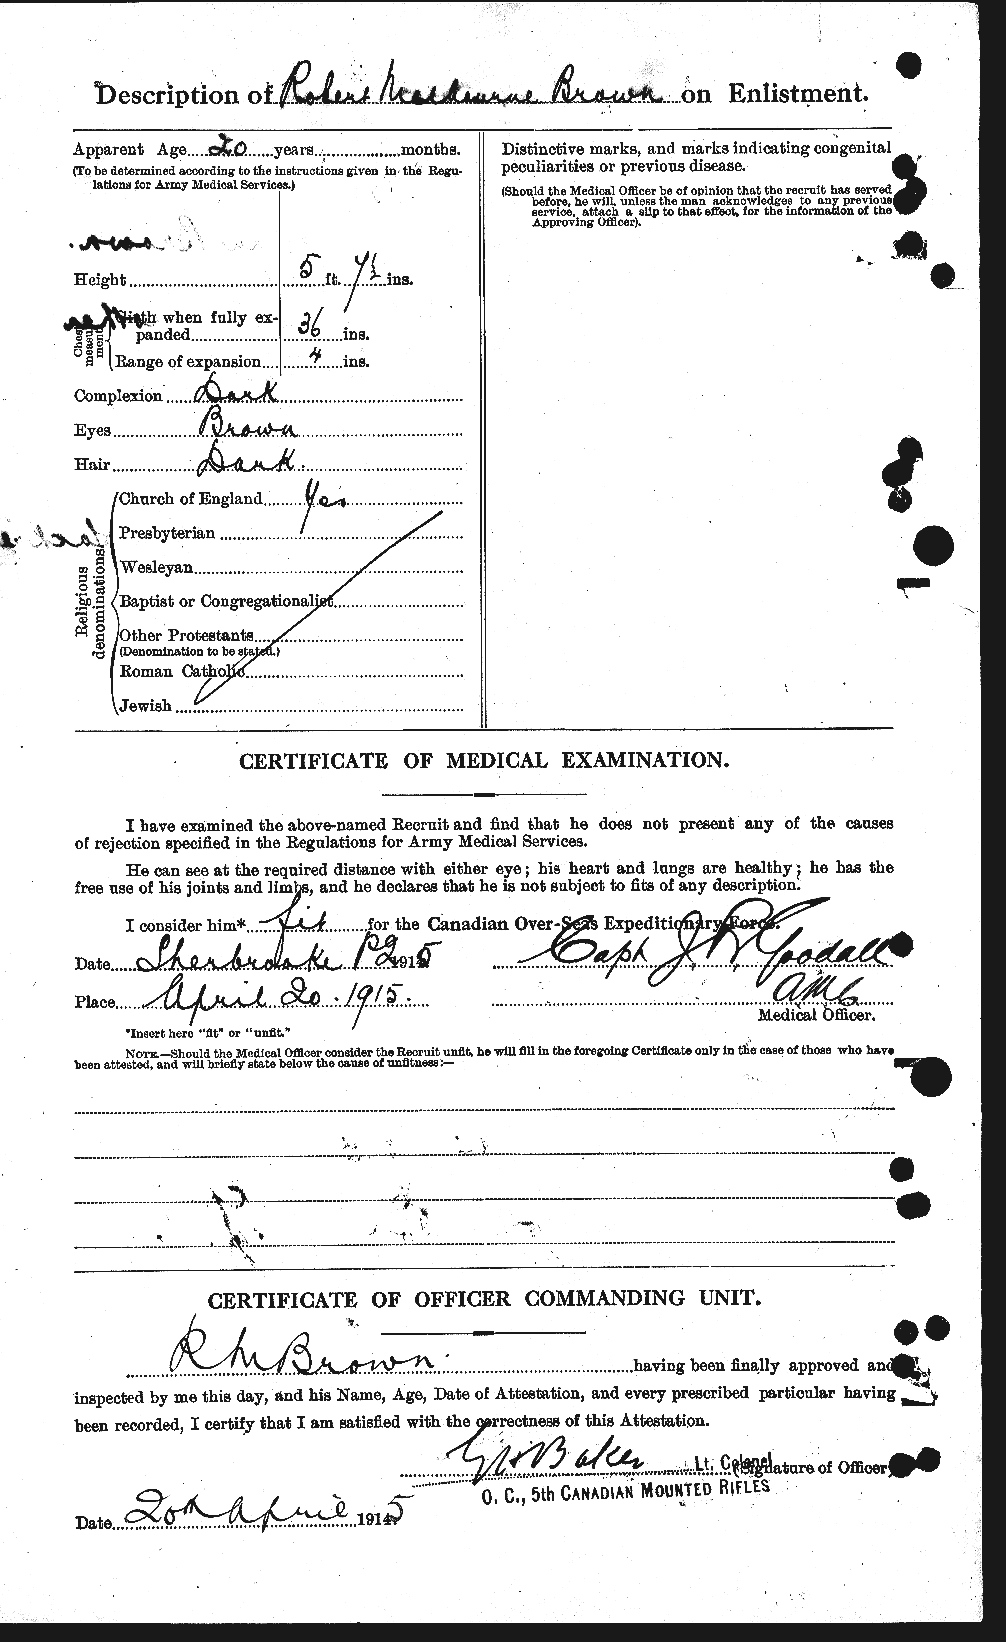 Personnel Records of the First World War - CEF 269952b